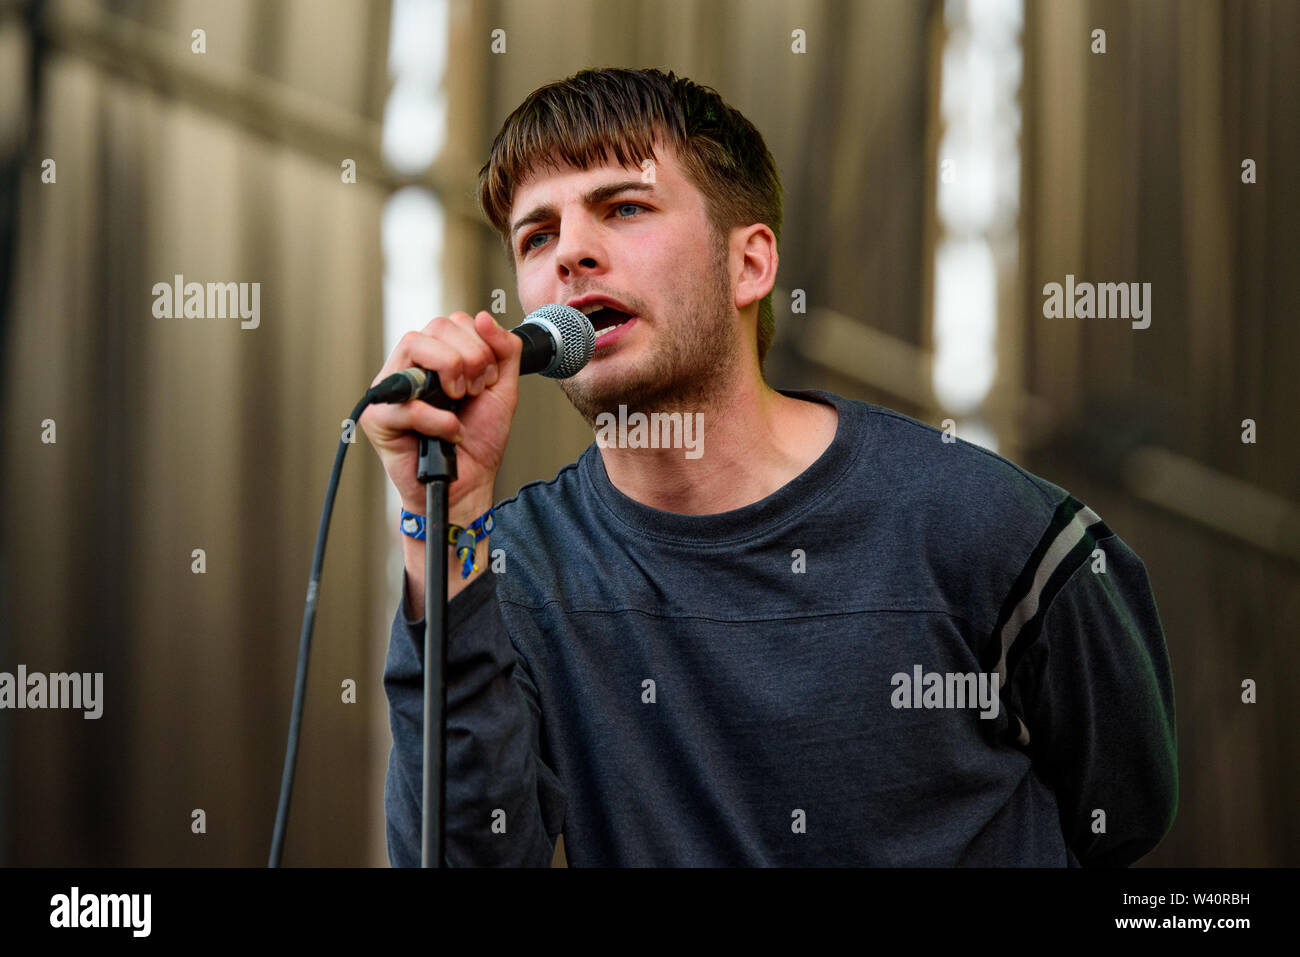 Benicassim, Spain. 18th July, 2019. Fontaines D.C. (band) perform in concert at FIB 2019 Festival on July 18, 2019 in Benicassim, Spain. Credit: Christian Bertrand/Alamy Live News Stock Photo